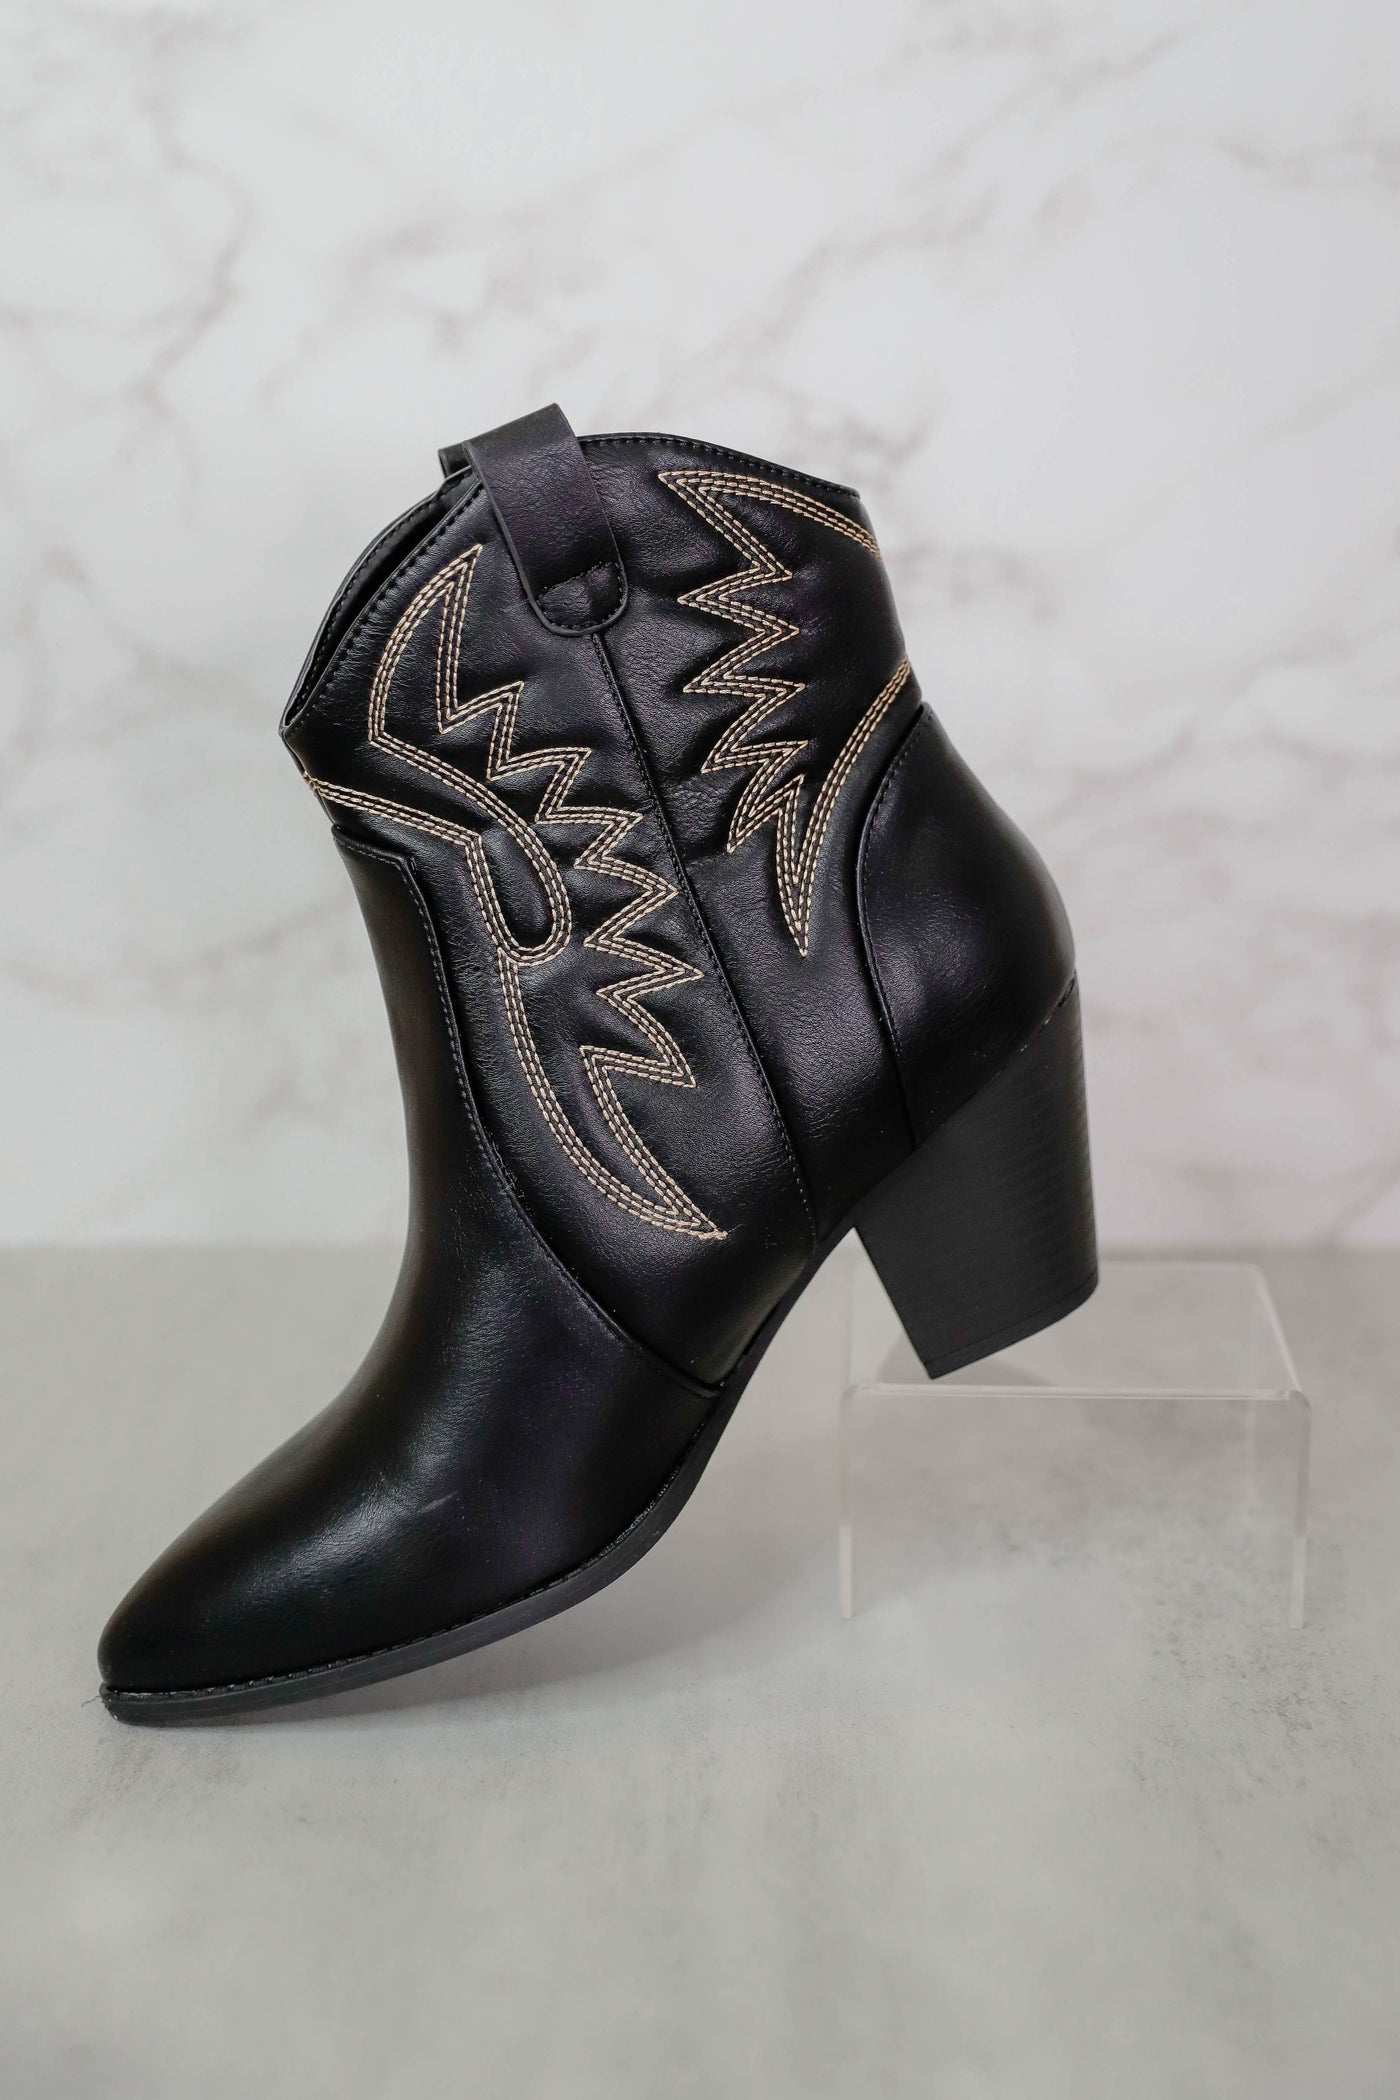 Black Western Booties- Women's Cowboy Booties-Affordable Women's Boots